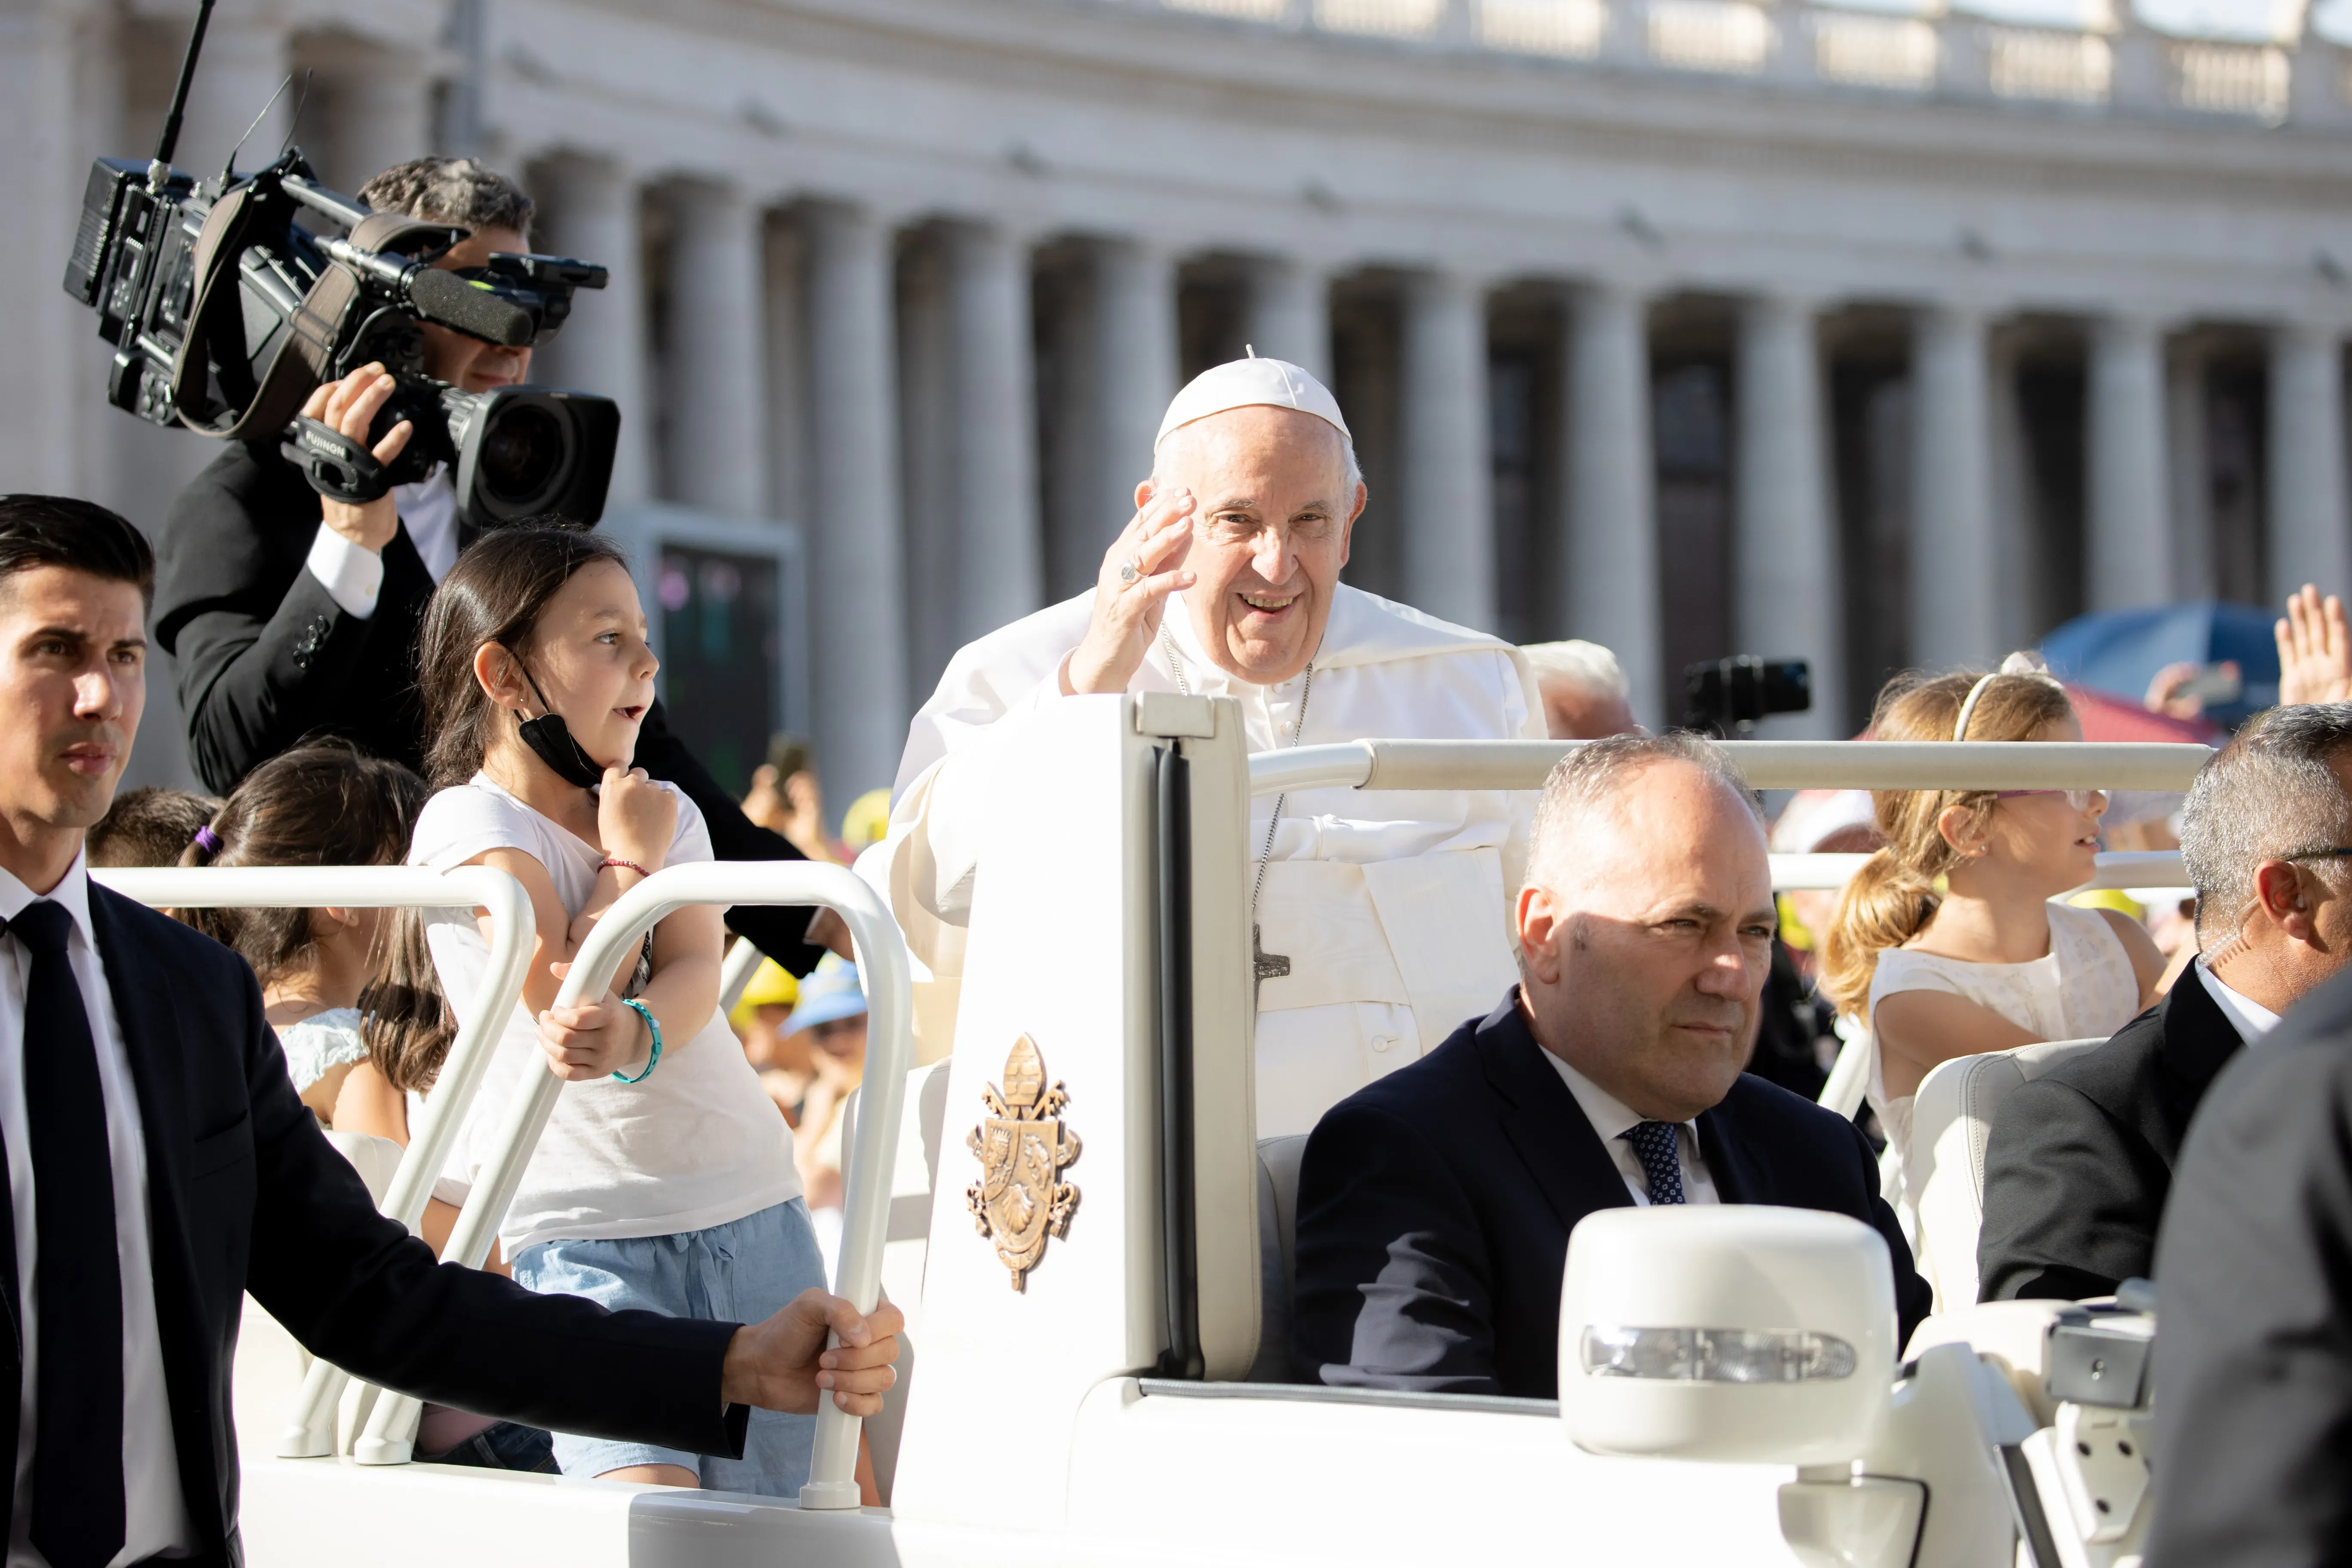 Pope Francis greets families in St. Peter's Square before Mass for the World Meeting of Families 2022 on June 25, 2022. Daniel Ibanez/CNA